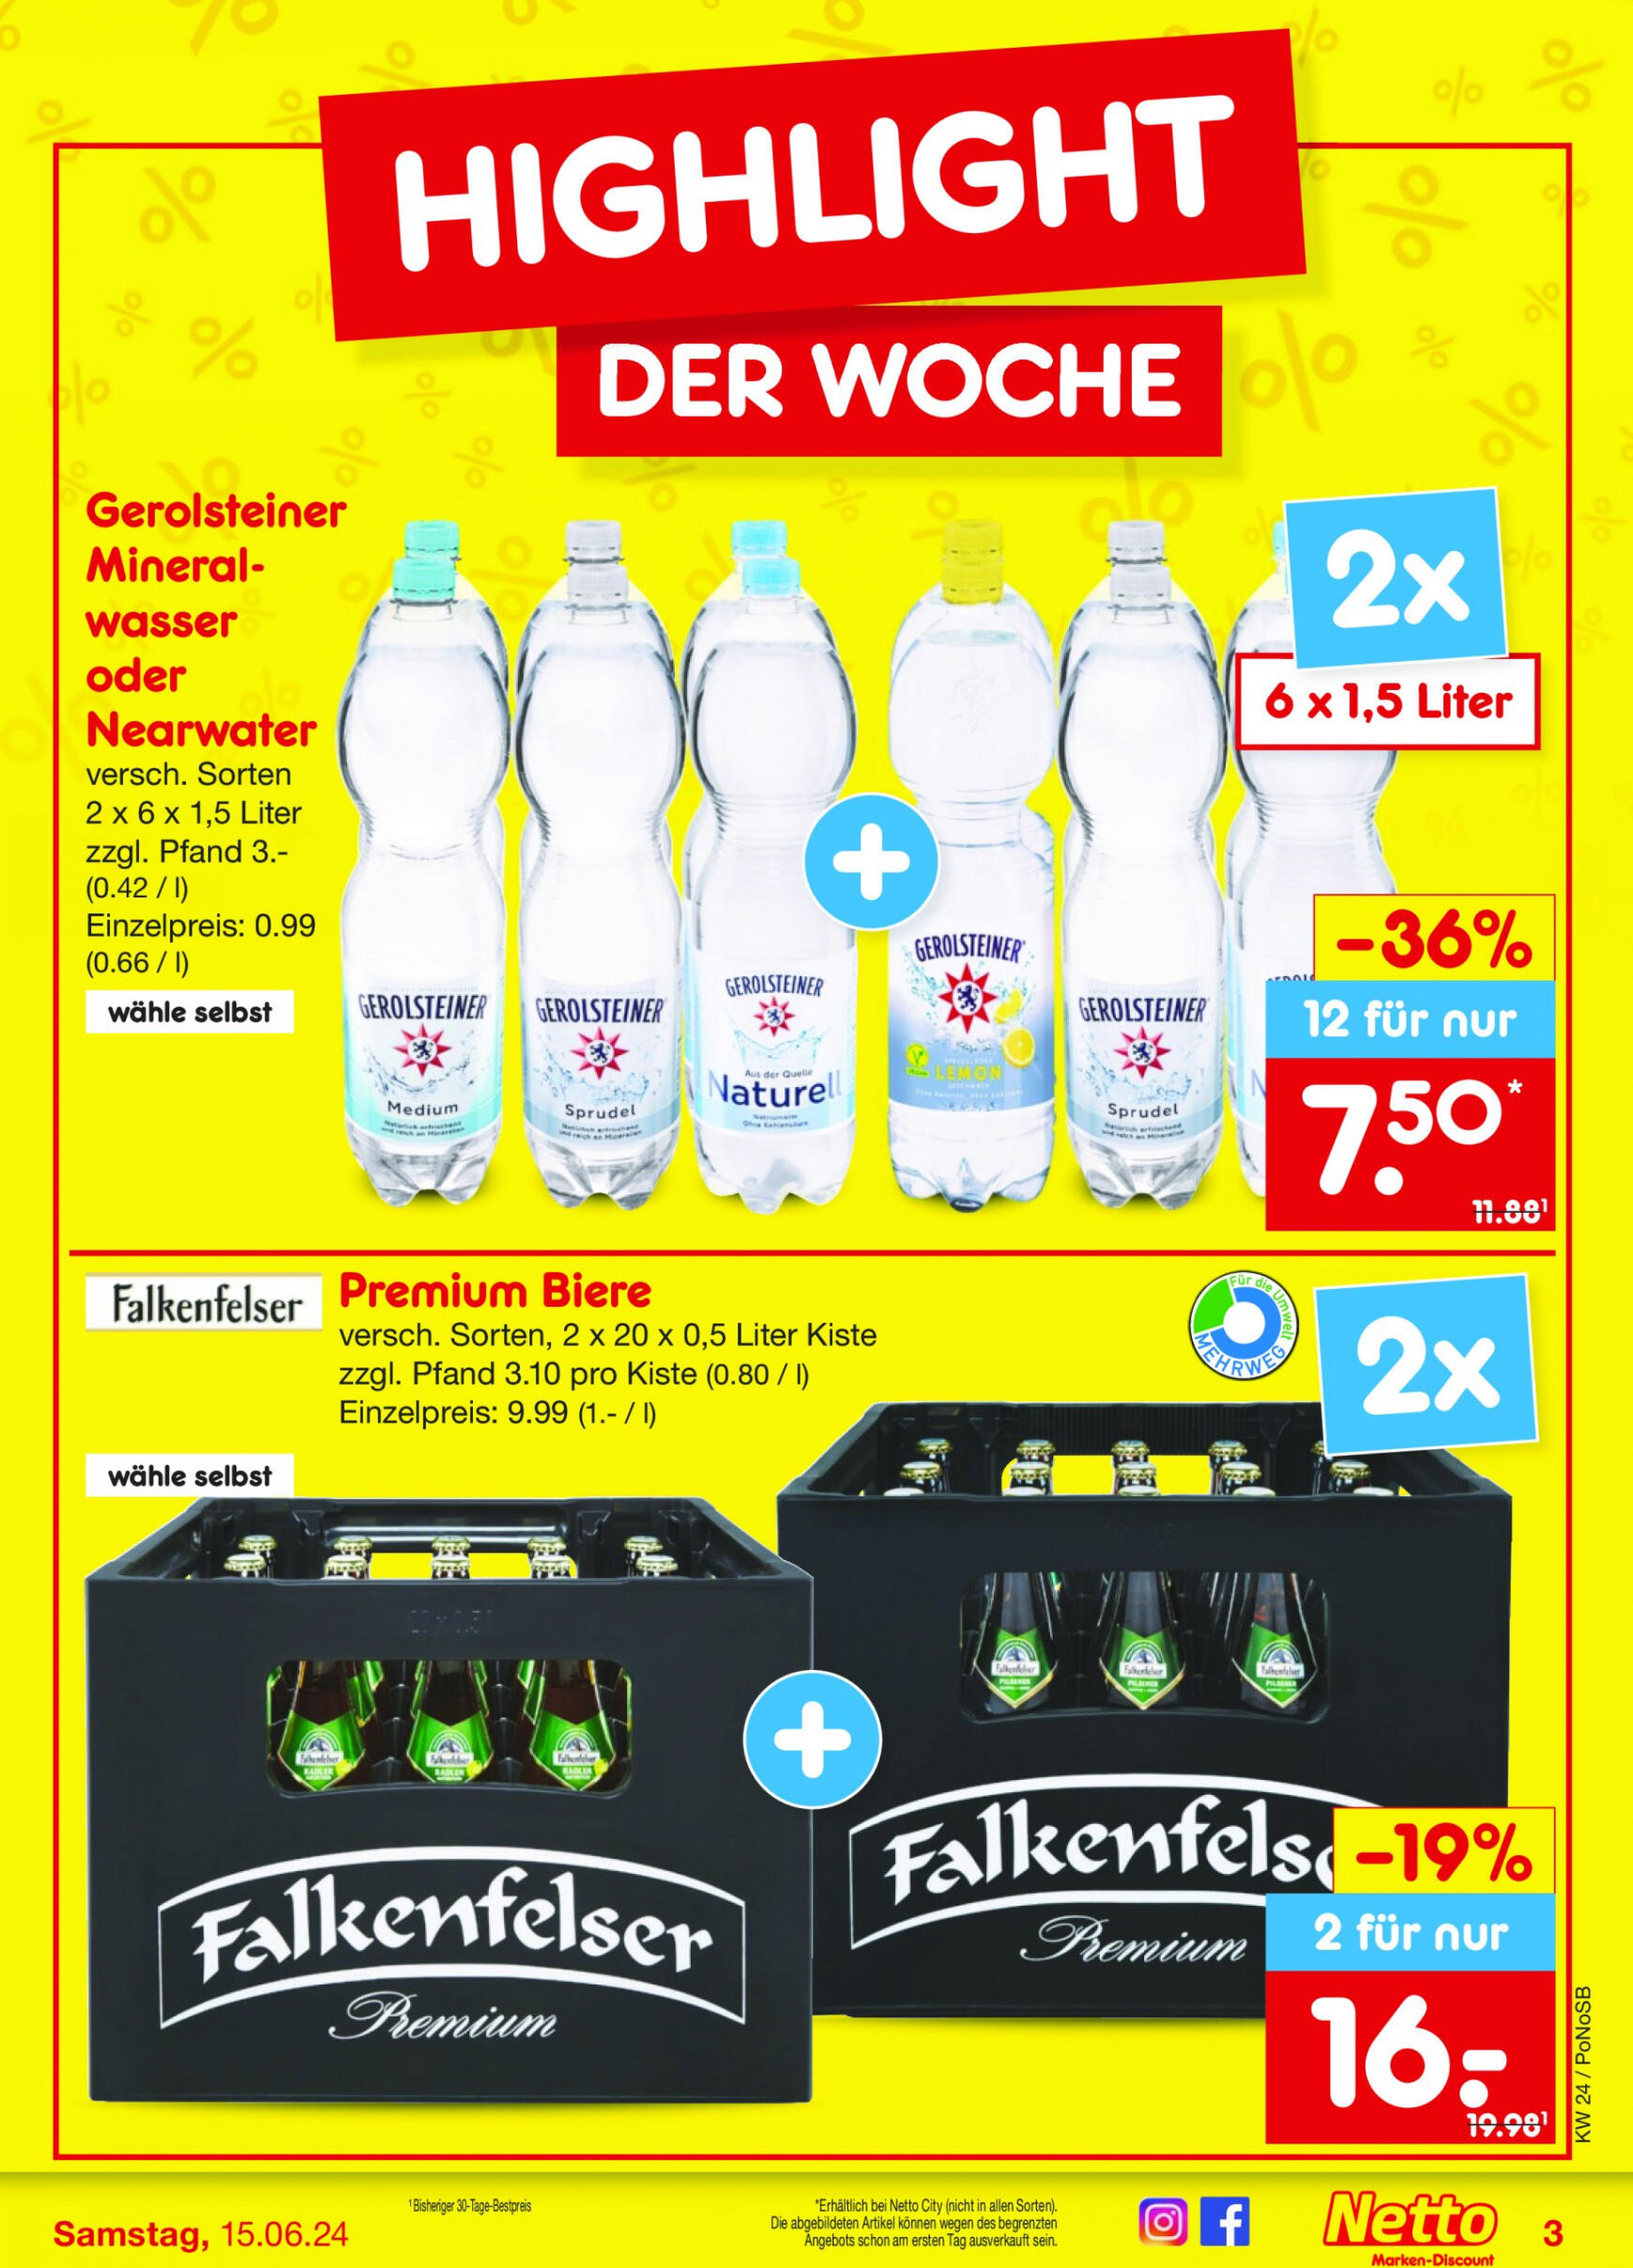 netto - Flyer Netto aktuell 10.06. - 15.06. - page: 5